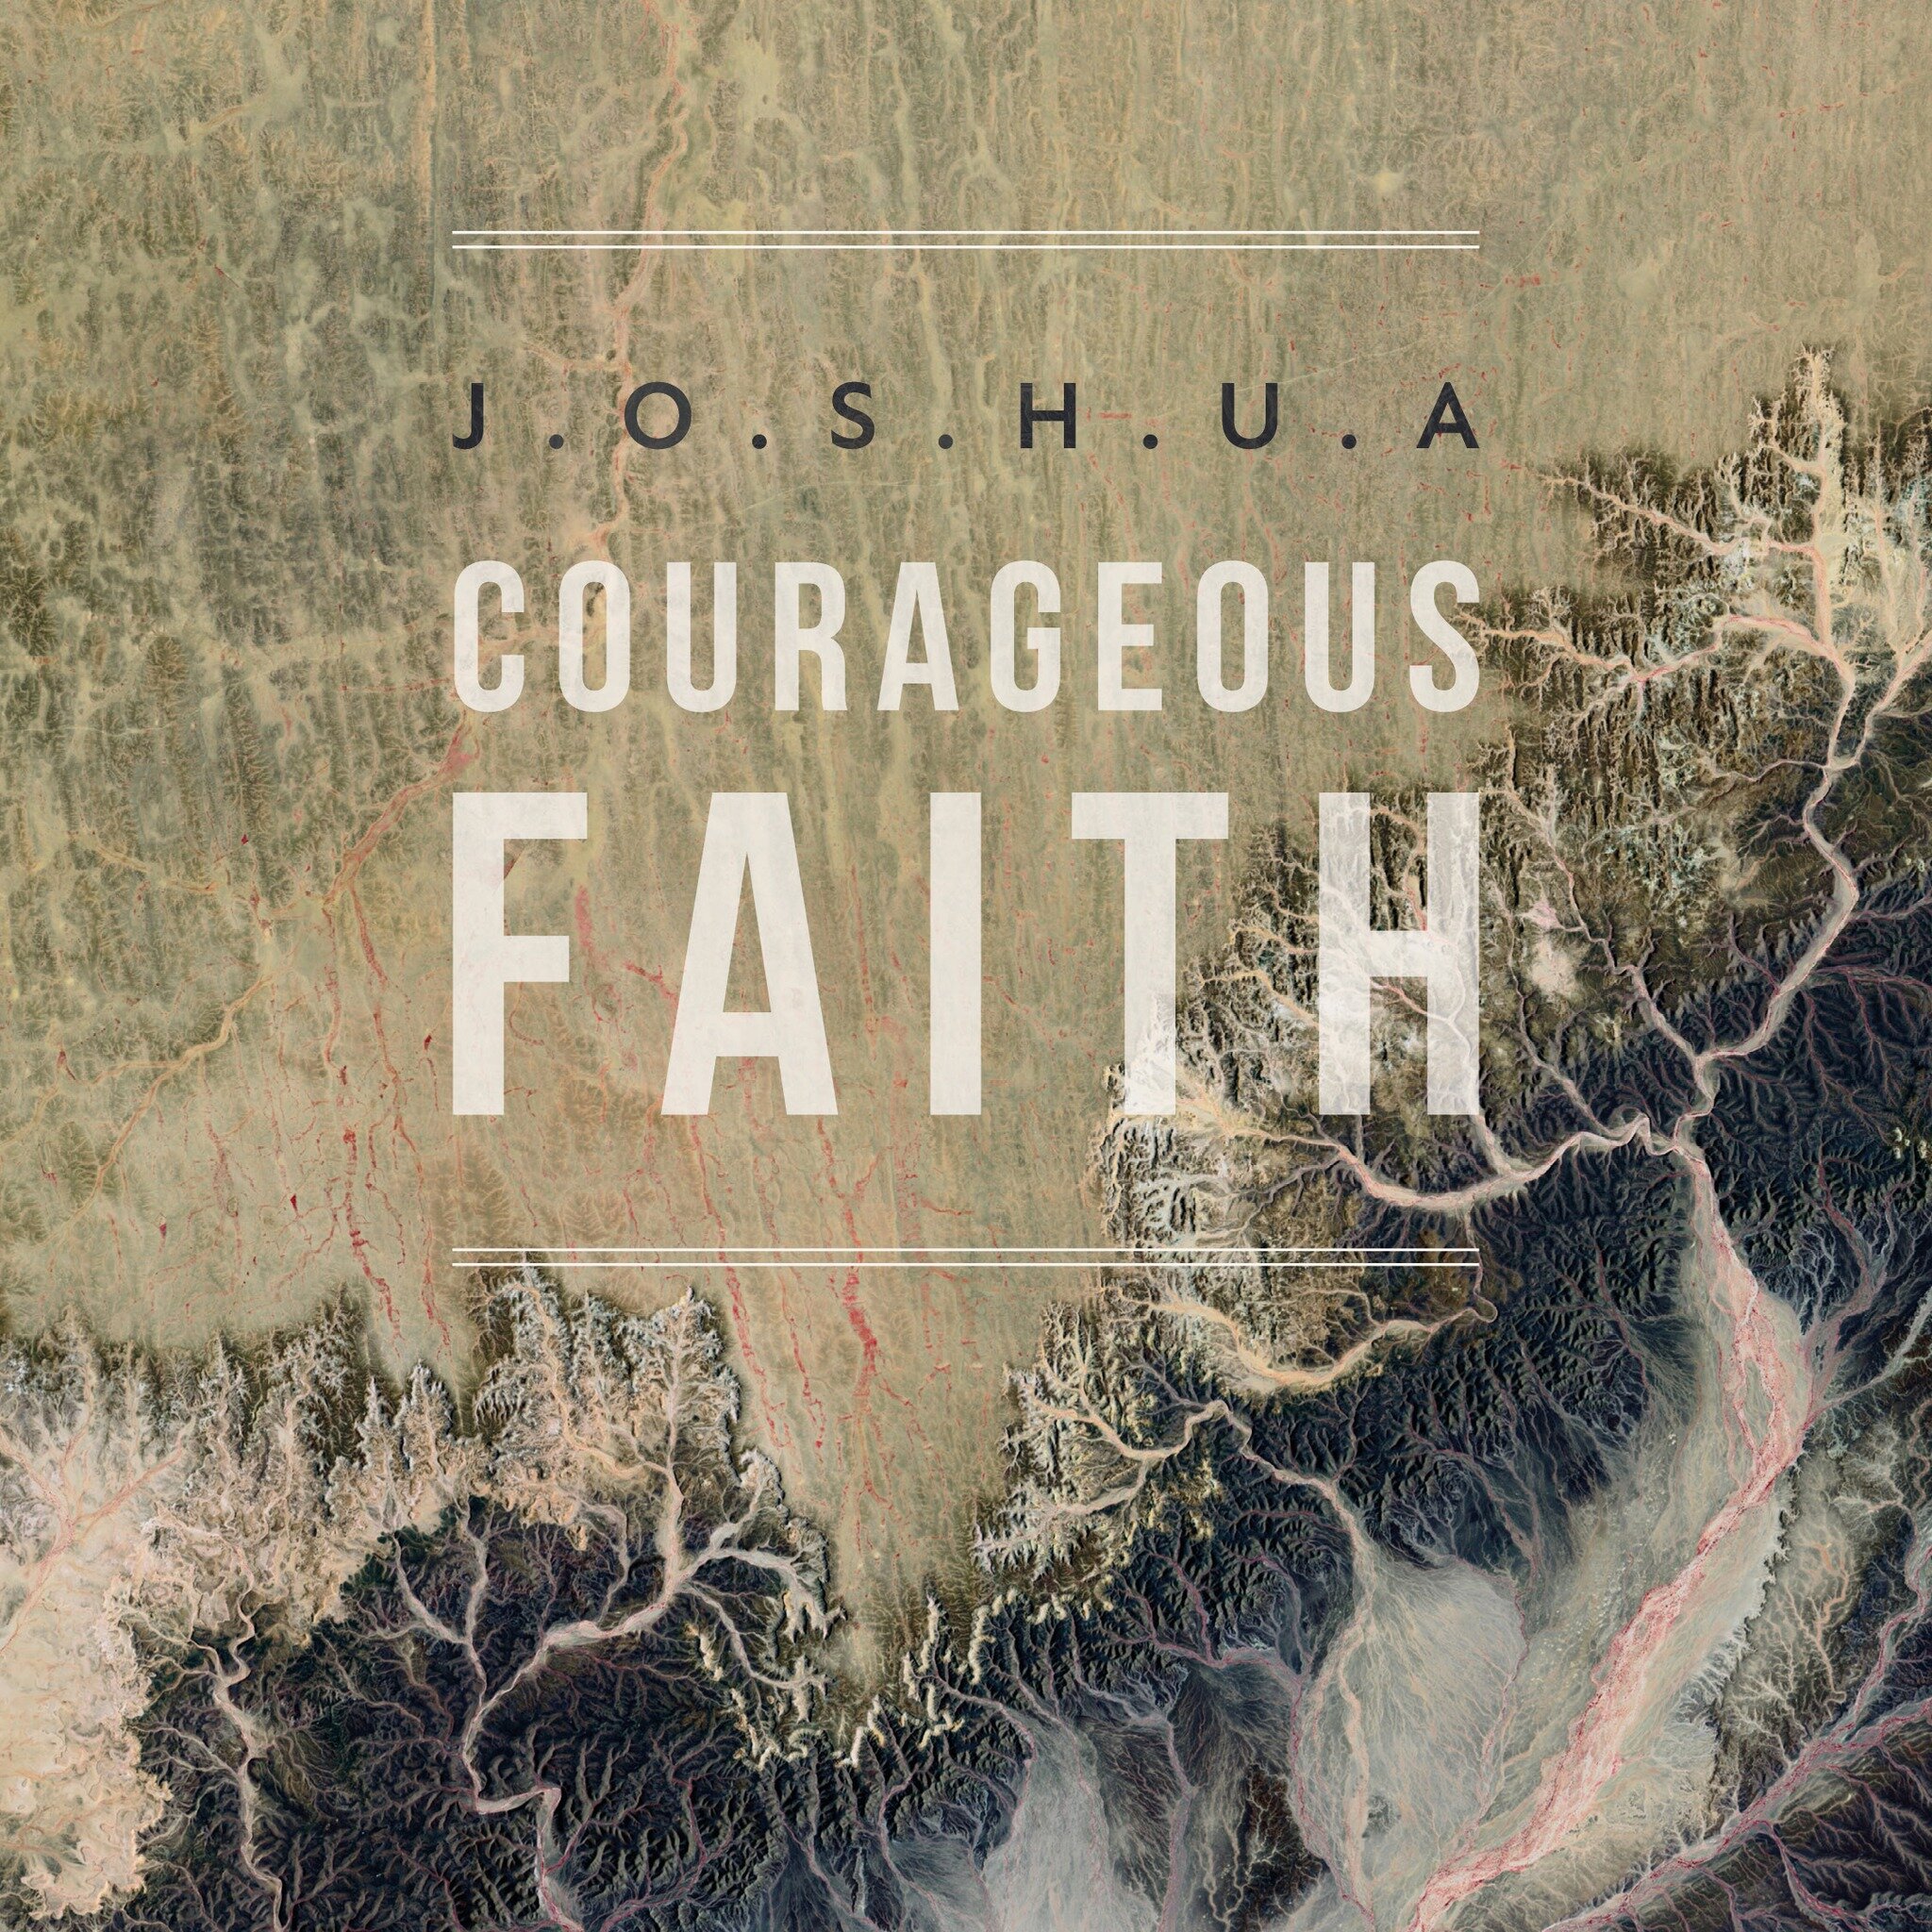 JOSHUA | COURAGEOUS FAITH

Join us this Sunday as we begin our new series on the book of Joshua. We will be exploring the courageous faith of this famous Bible character.
Our meeting starts by 10:30am at 156 Arundel Street.

#emmanuelsheff